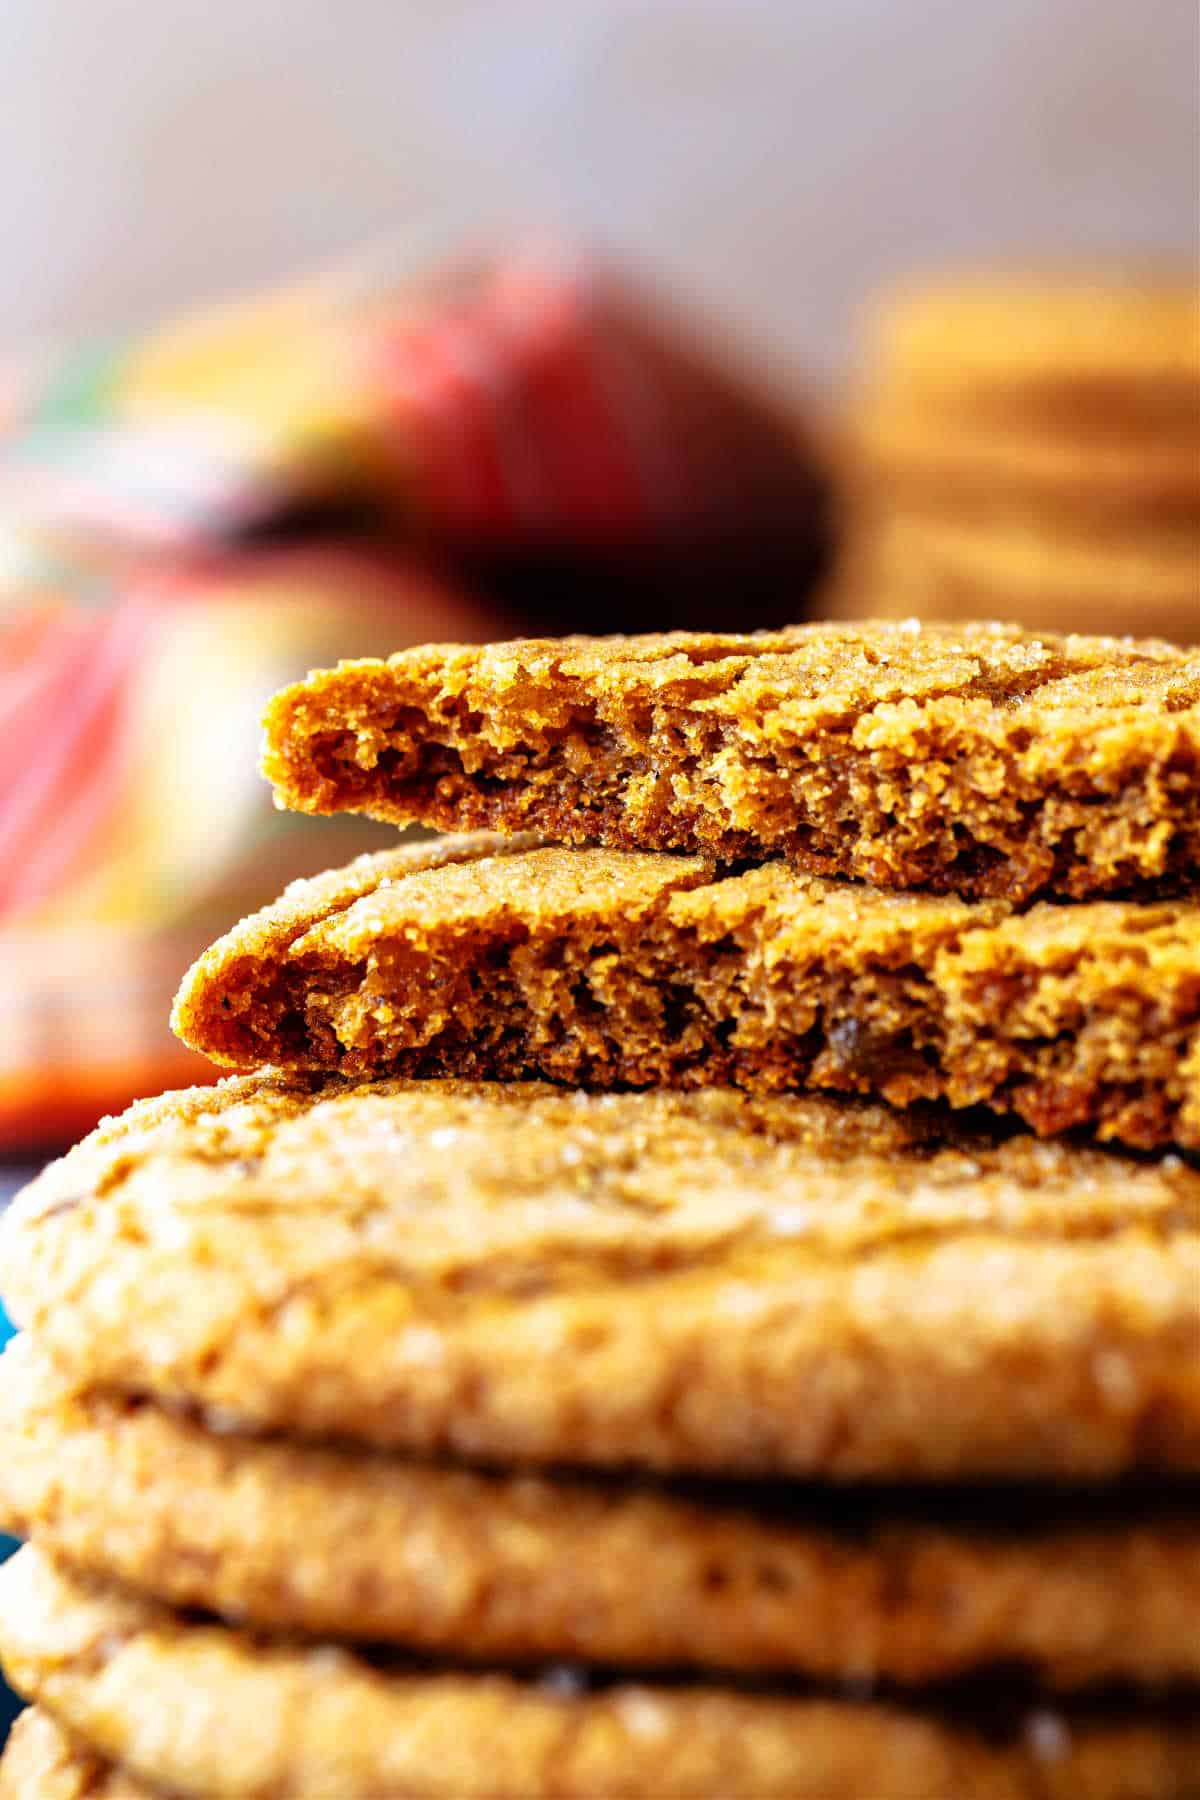 A close up of a stack of gingersnaps with the top one broken in two. The two halves rest on top of each other to show the dense, moist, chewy interior.